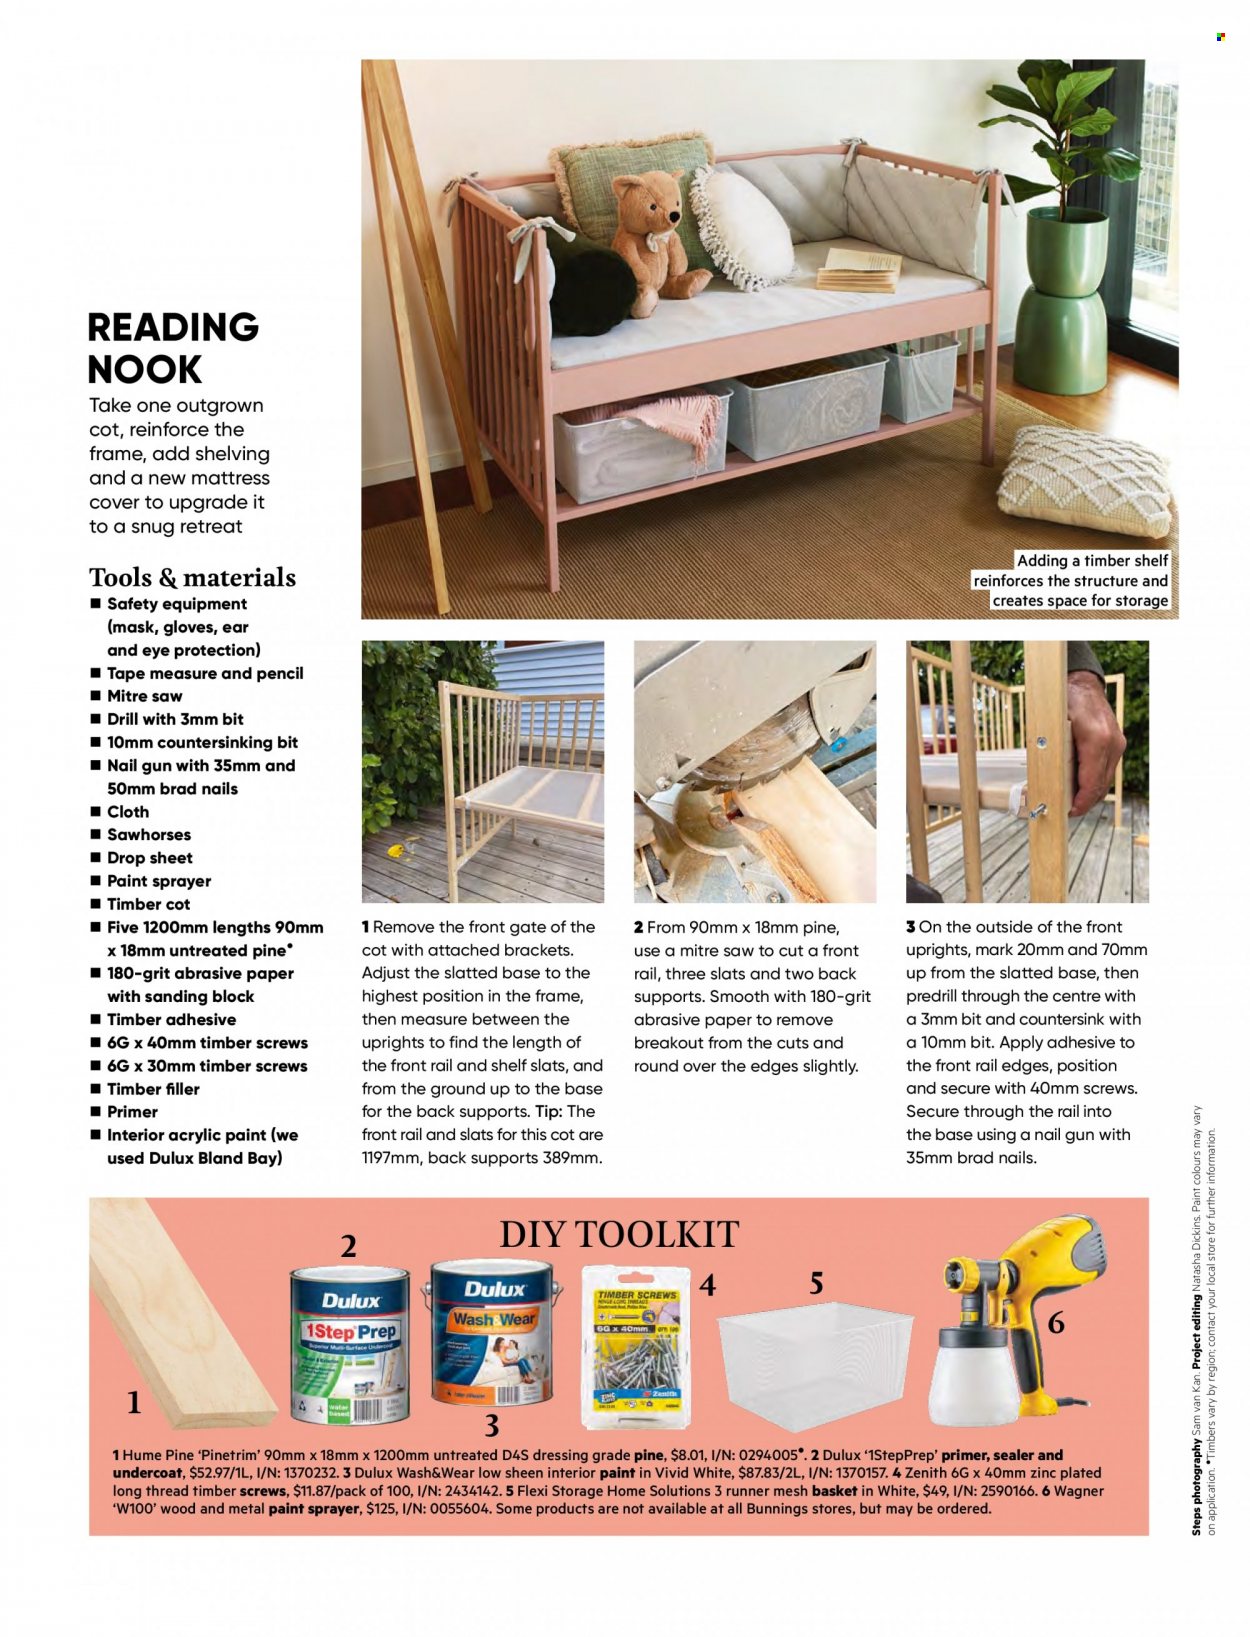 thumbnail - Bunnings Warehouse mailer - Sales products - shelves, mattress, dressing, basket, adhesive, paint sprayer, plastic drop sheet, paint, Dulux, drill, saw, measuring tape, sprayer. Page 68.